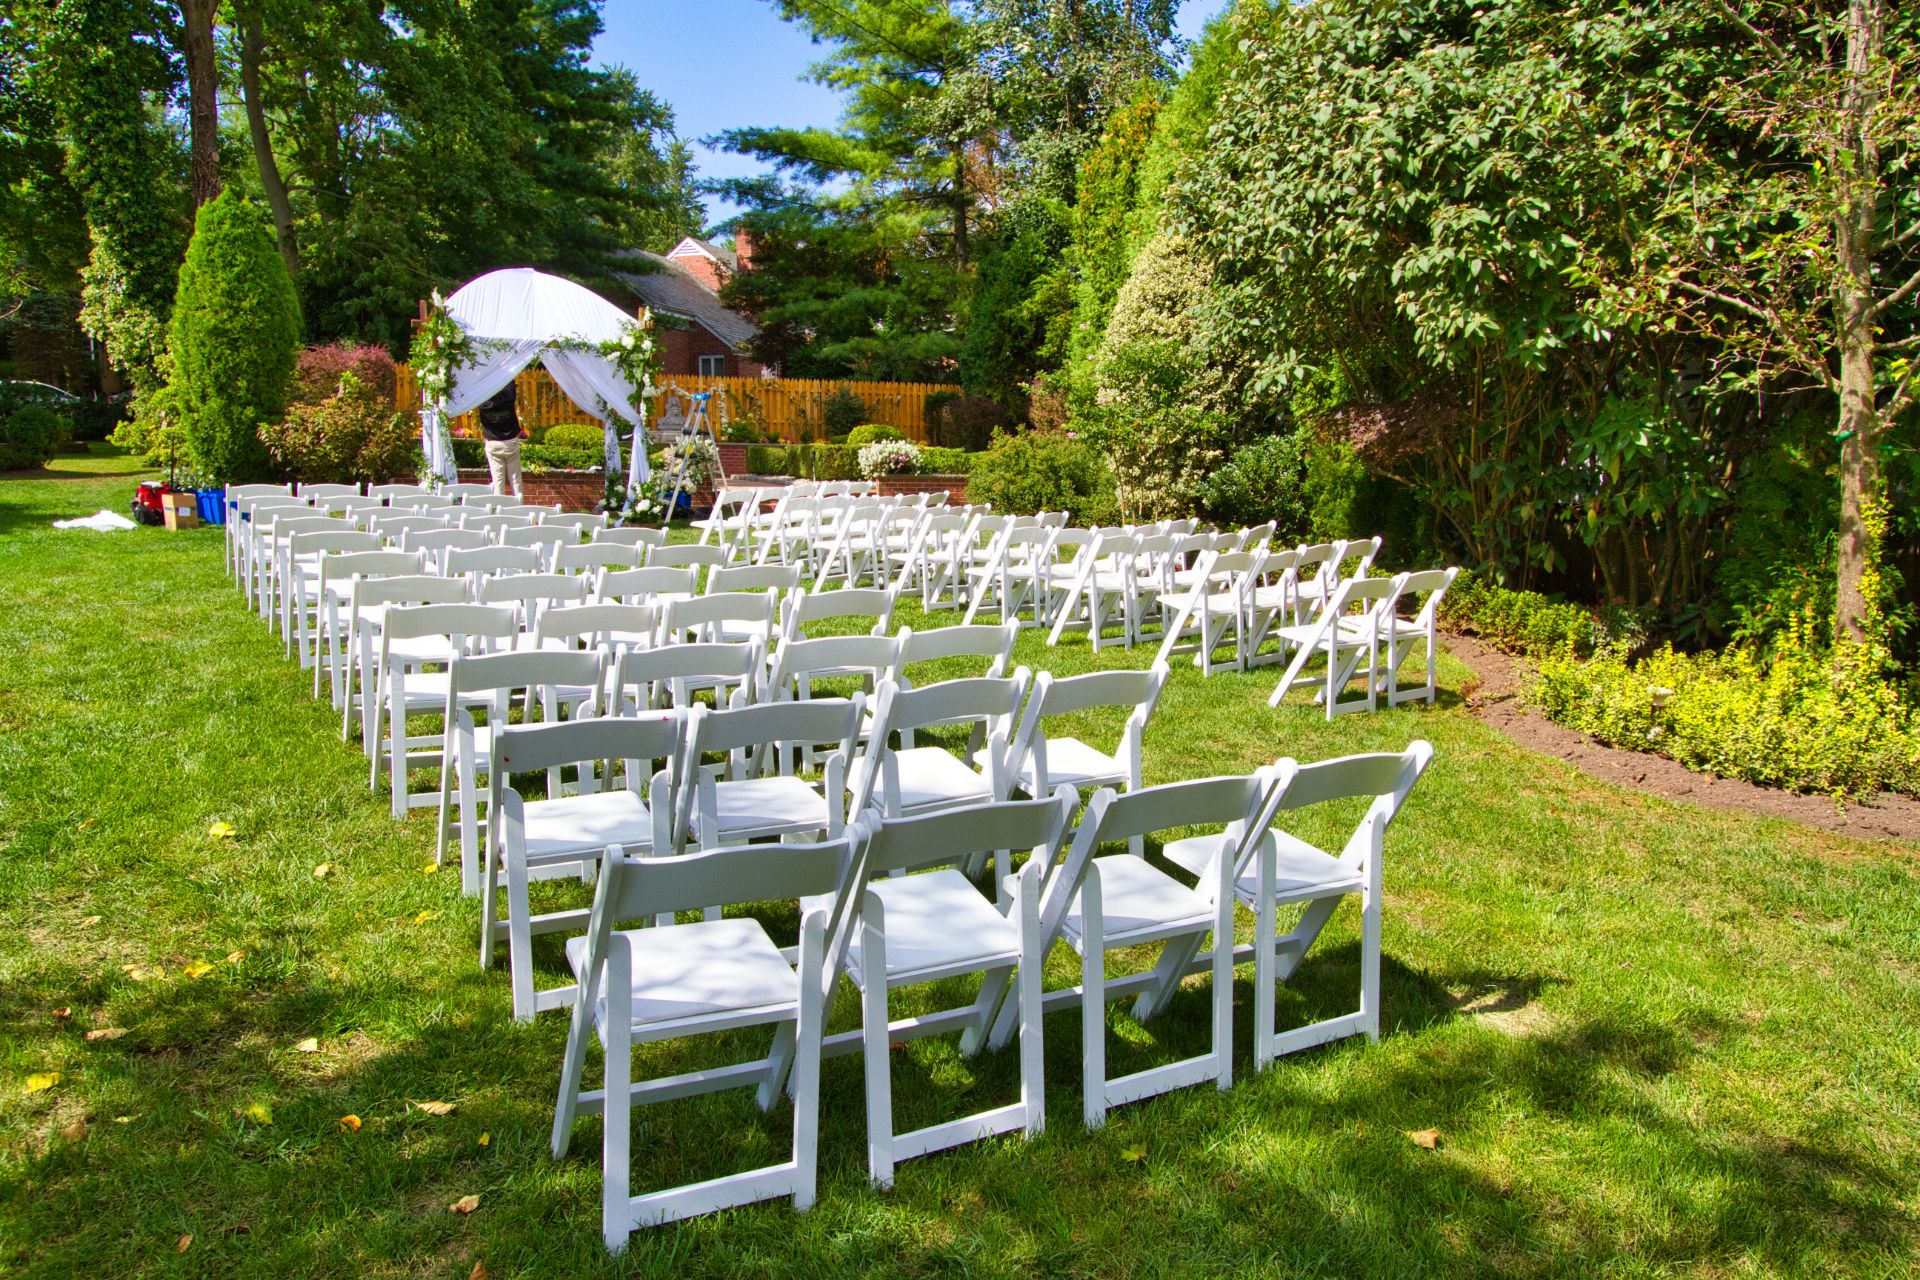 Garden Chairs setup for wedding ceremony on grass